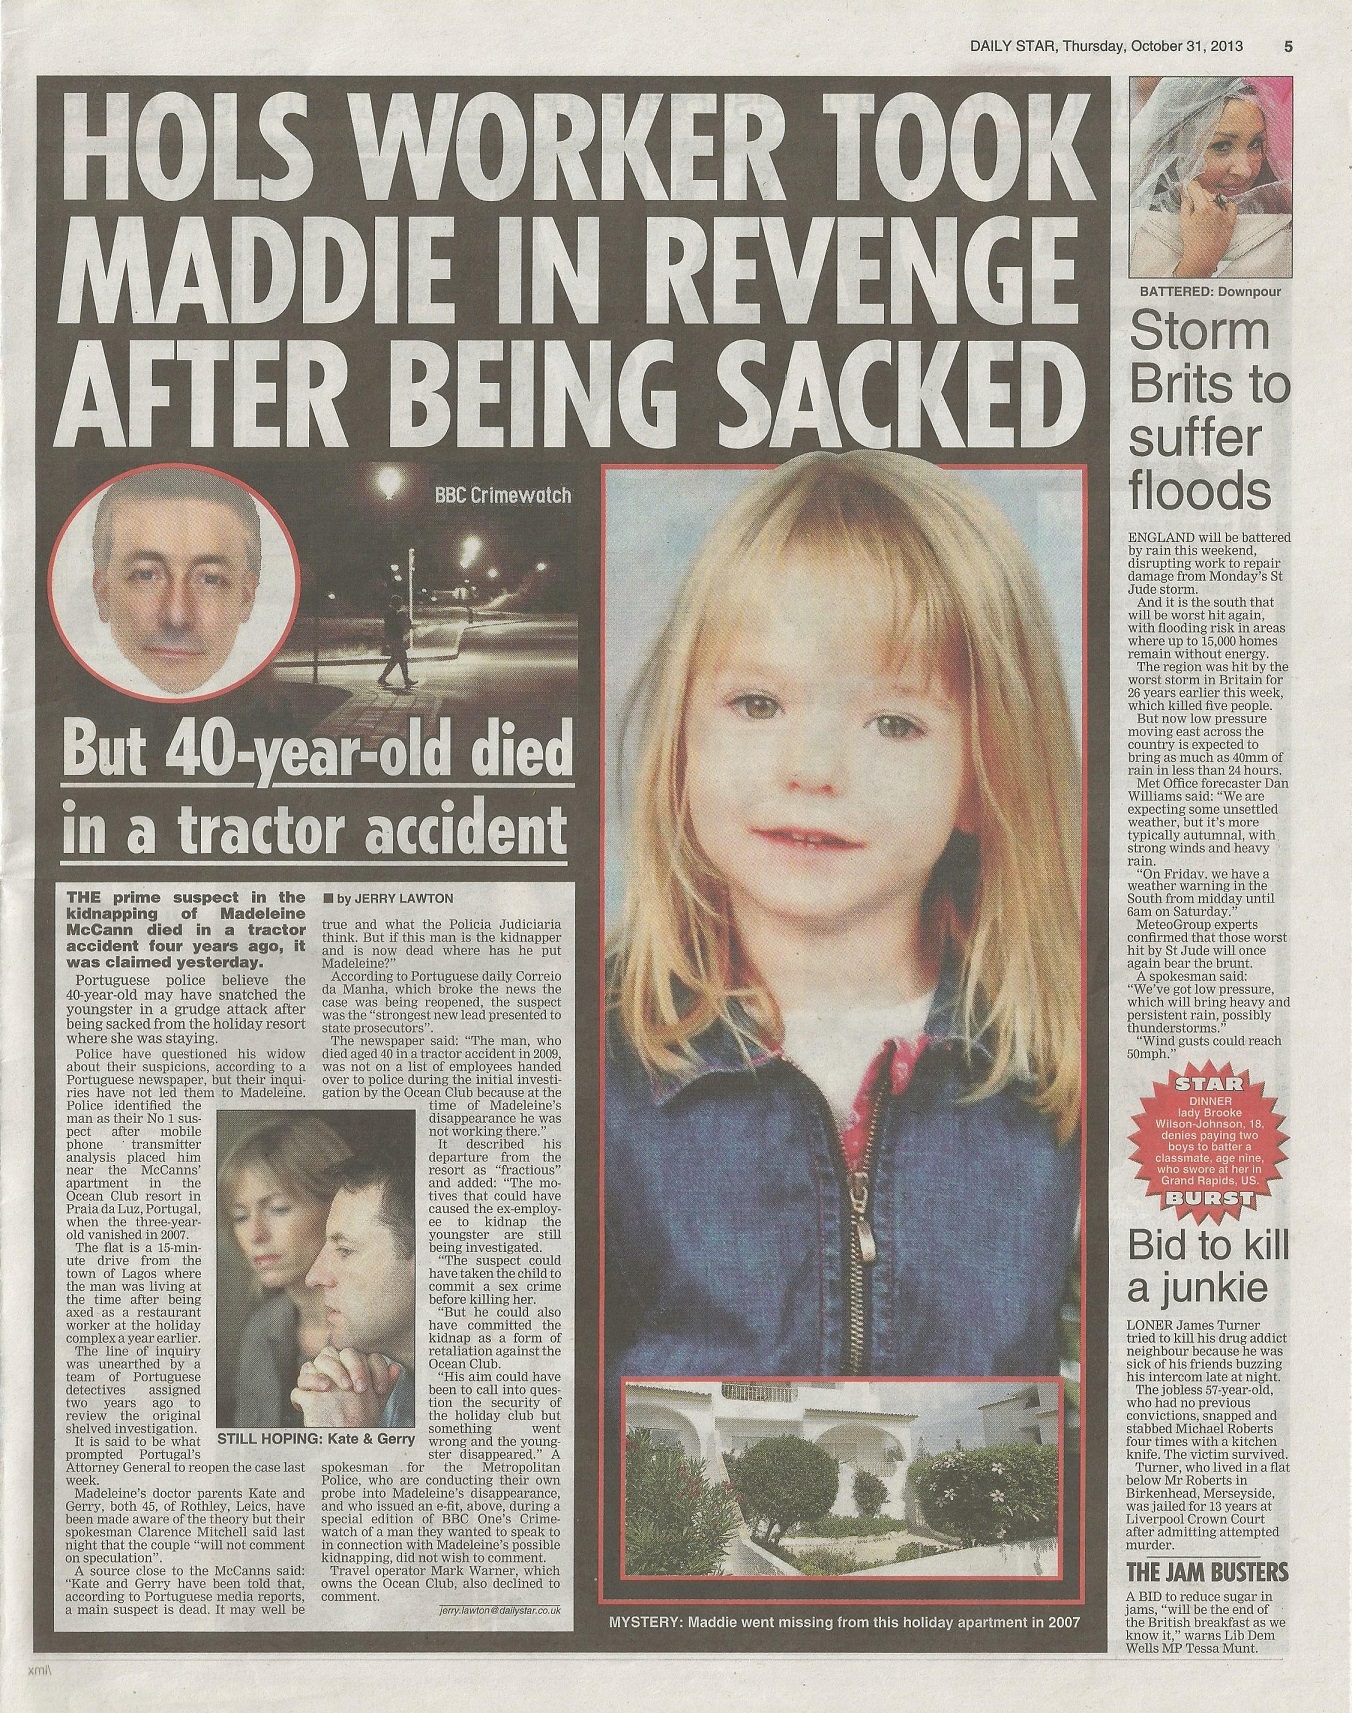 Daily Star, paper edition, page 5: 'HOLS WORKER TOOK MADDIE IN REVENGE AFTER BEING SACKED', 31 October 2013